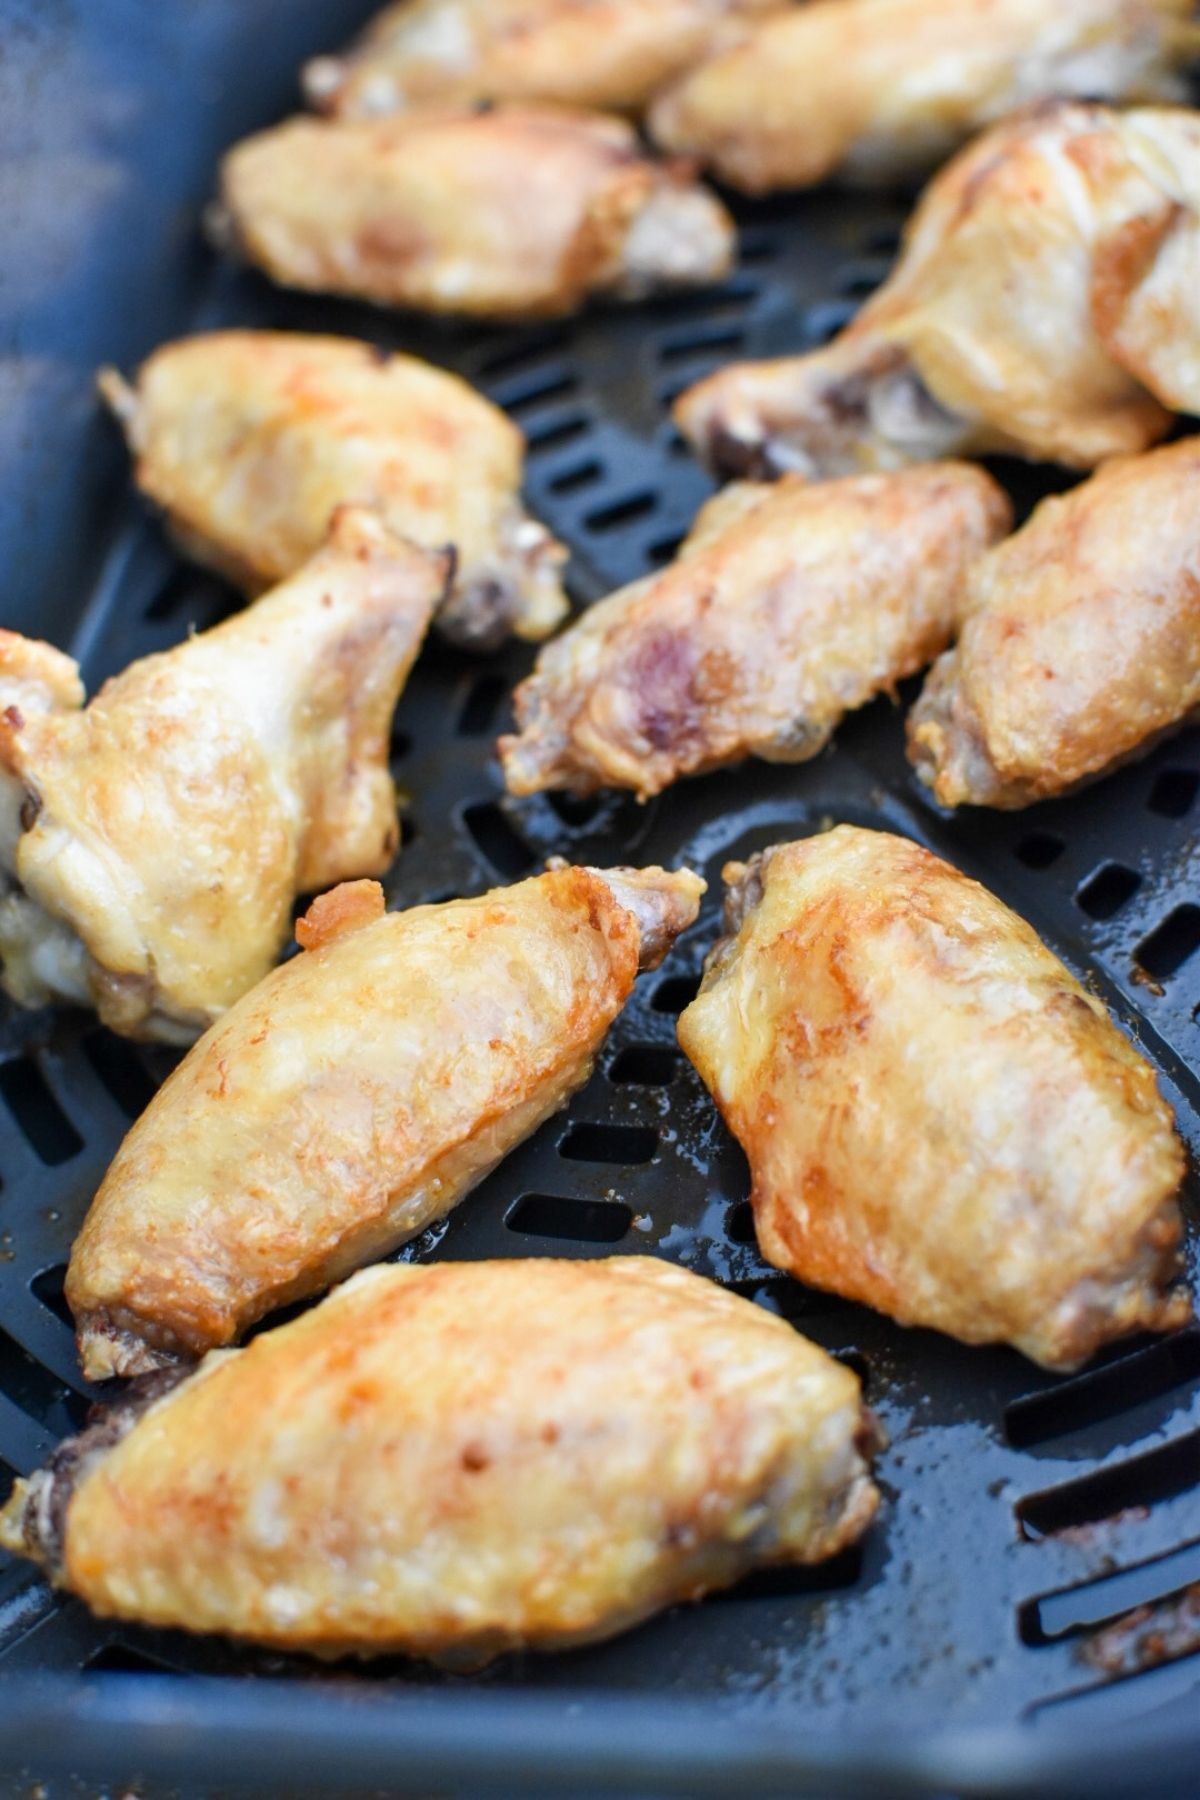 Cooked wings in an air fryer.